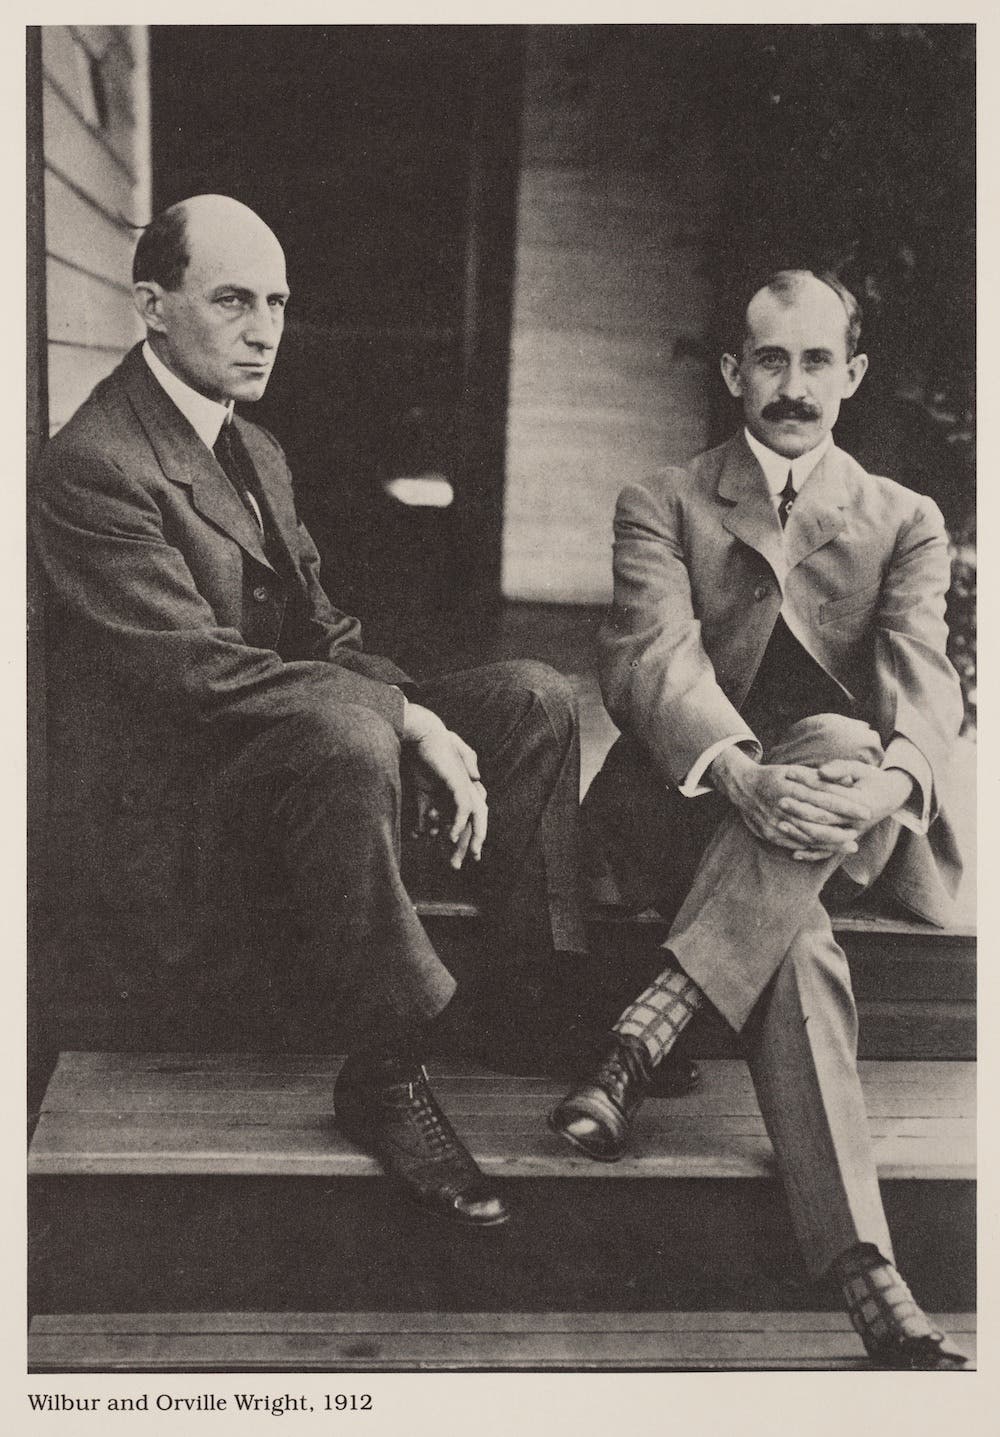 Wilbur (left) and Orville Wright at home in Dayton, Ohio, ca. 1910. Hallion, Richard P., ed. The Wright Brothers: Heirs of Prometheus. Smithsonian Institution, 1978. View Source.